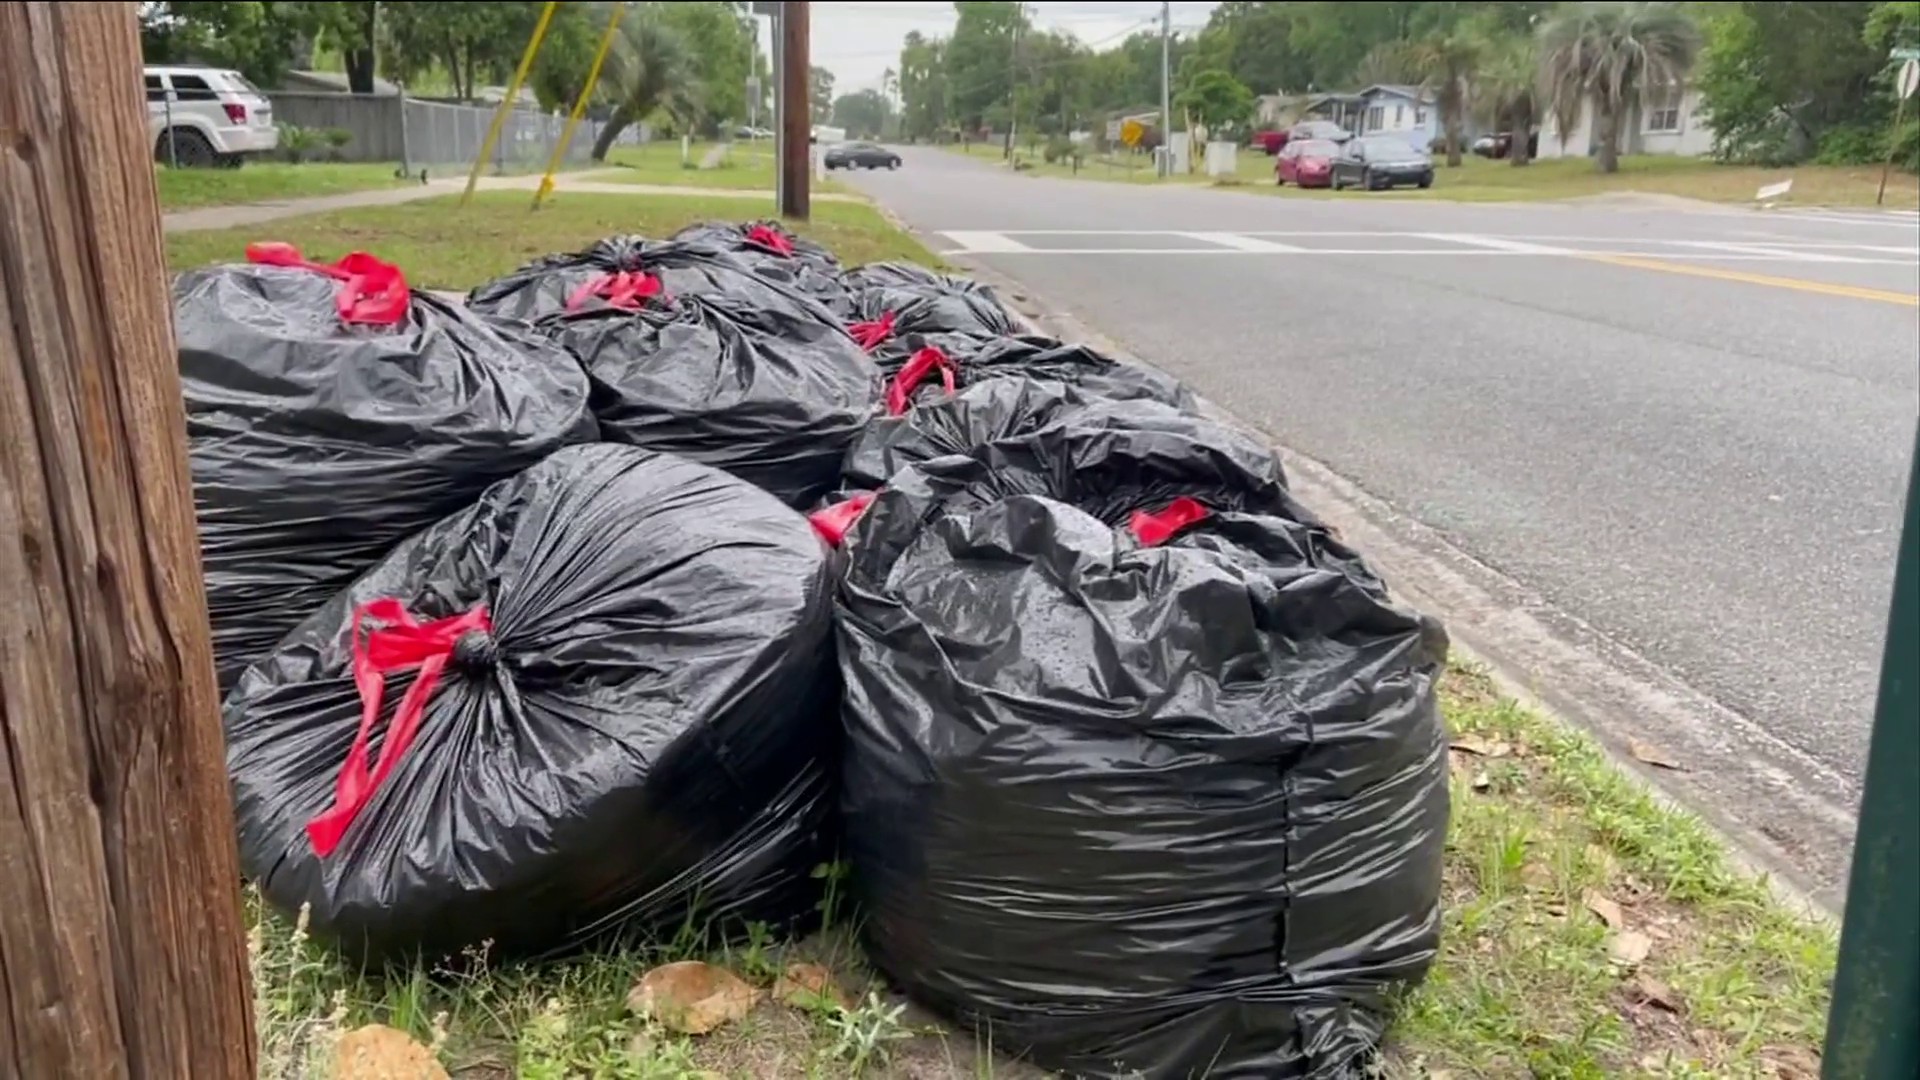 Premium Photo  Heap of plastic trash bags on curb waiting for